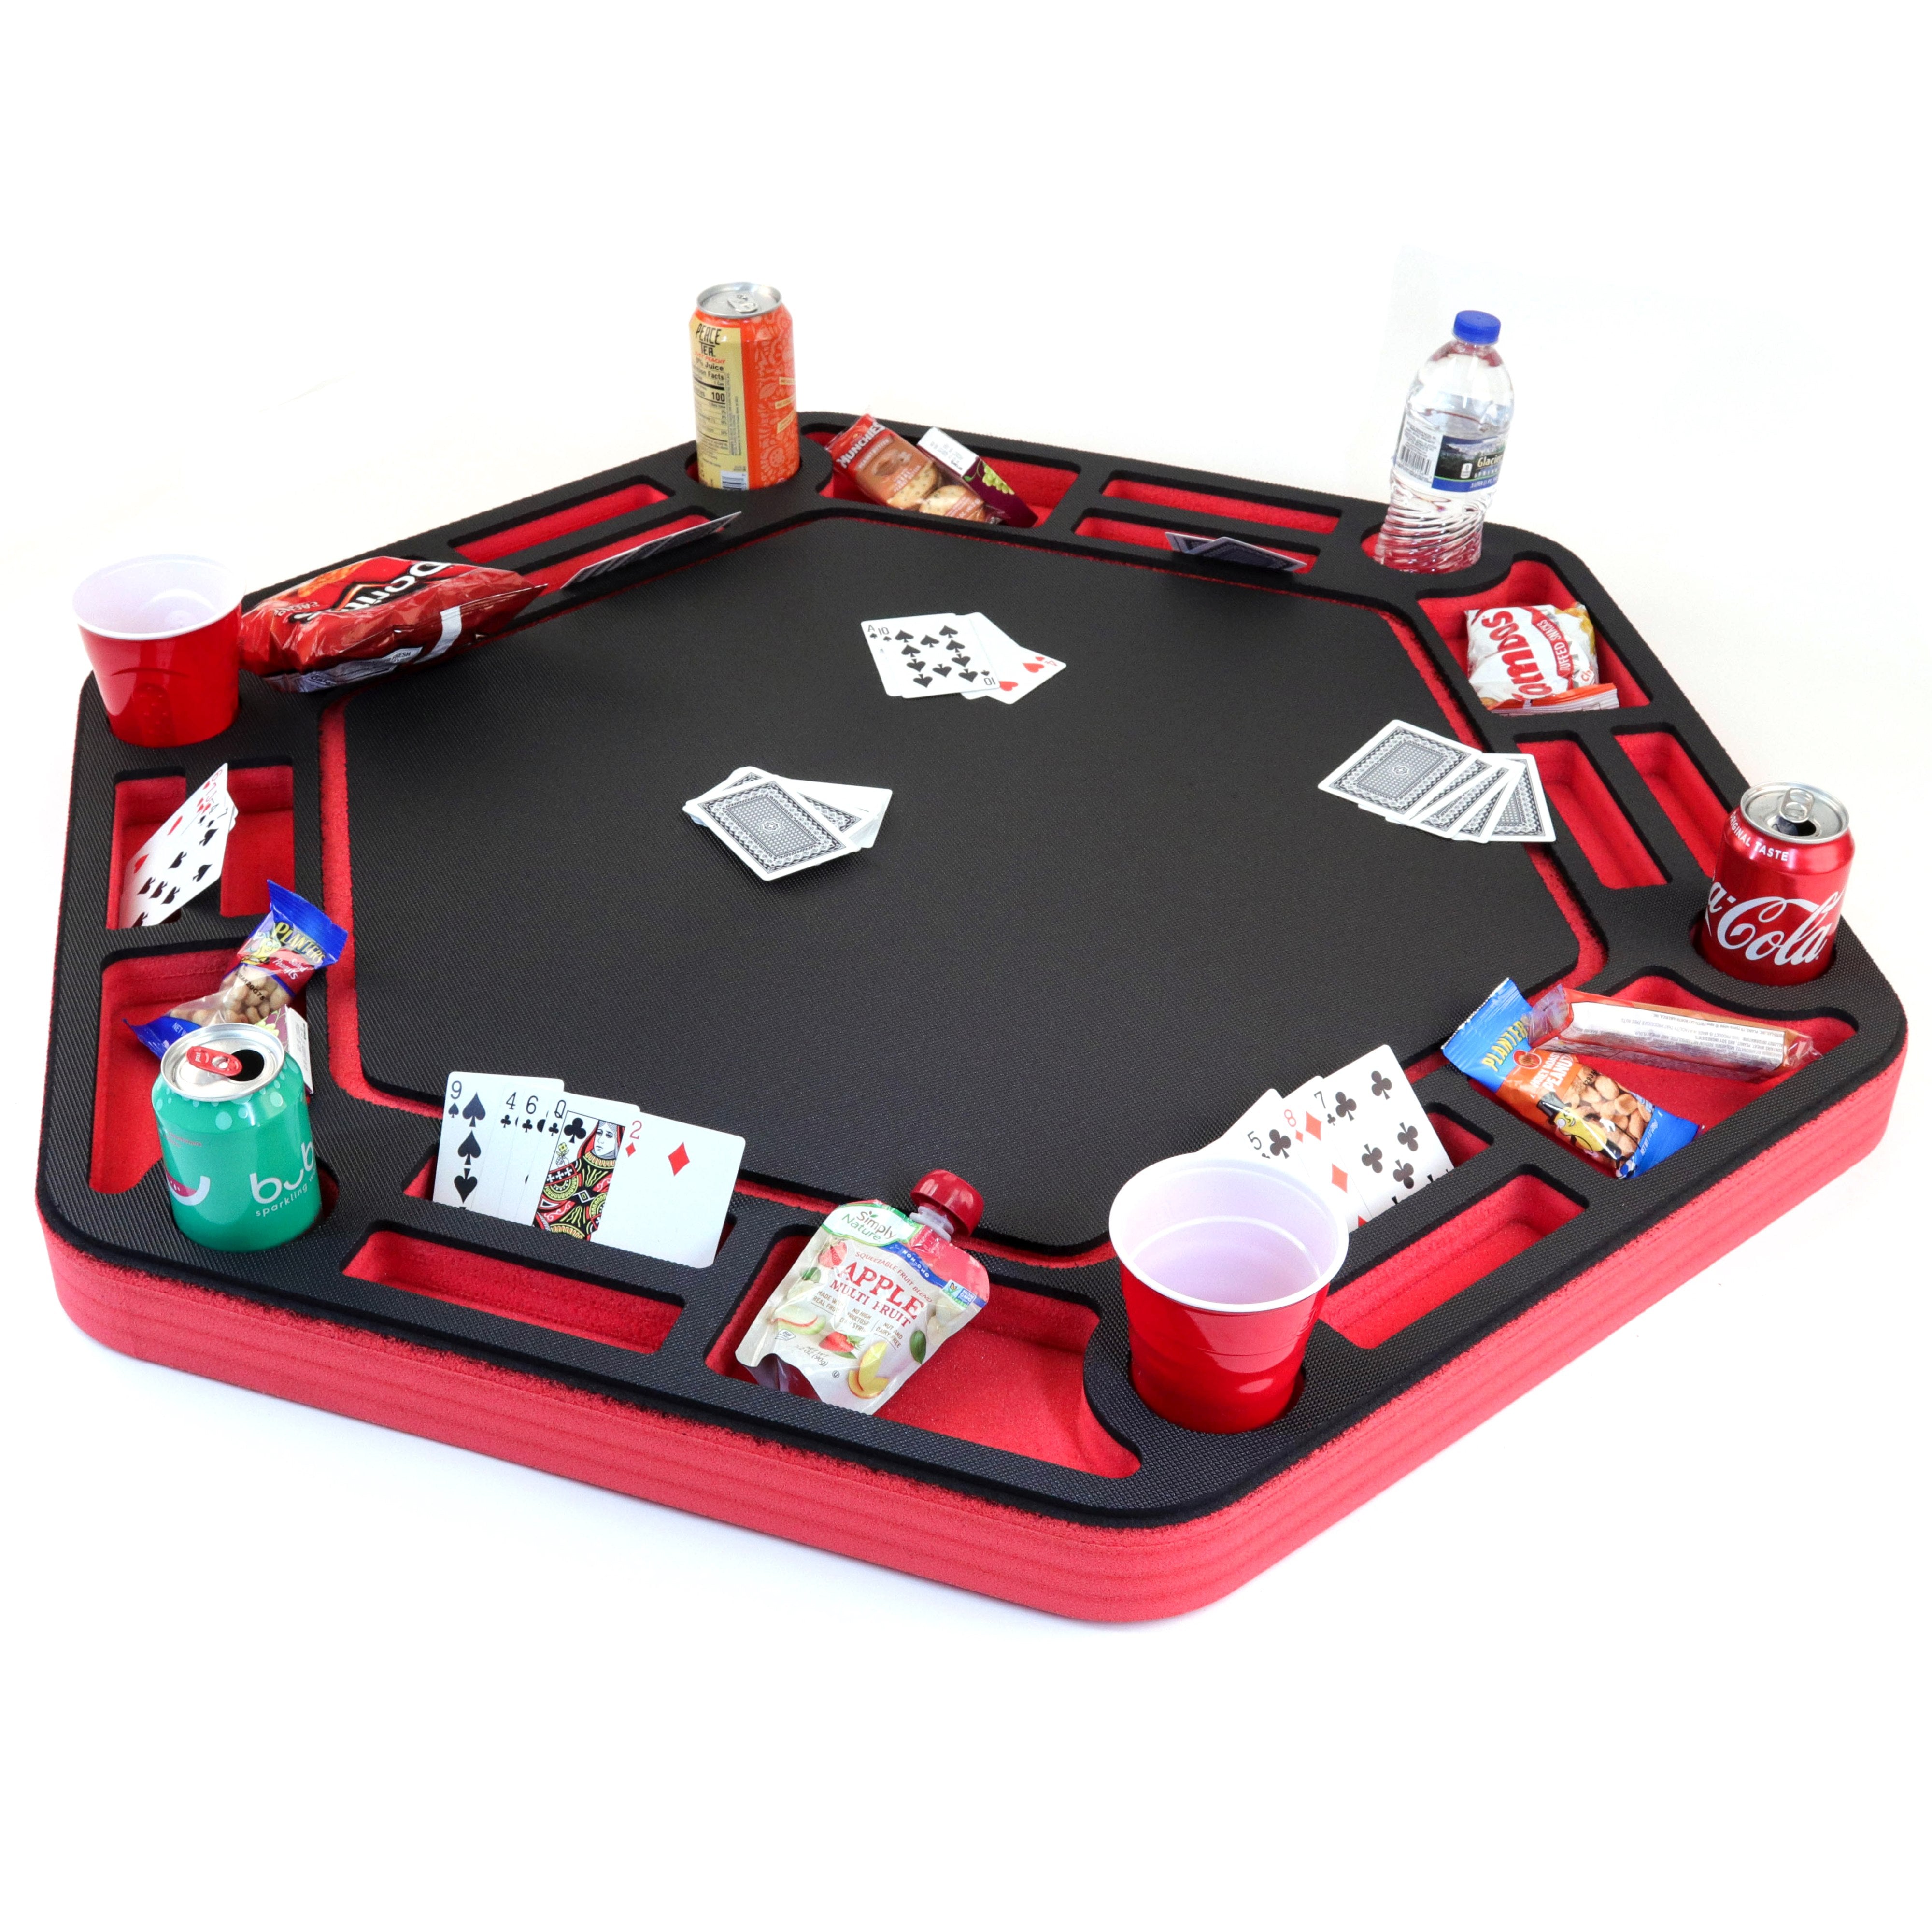 Floating Large Poker Table Red and Black Game Tray for Pool or Beach Party Float Lounge Durable Foam 40.5 Inch Chip Slots Drink Holders Deck